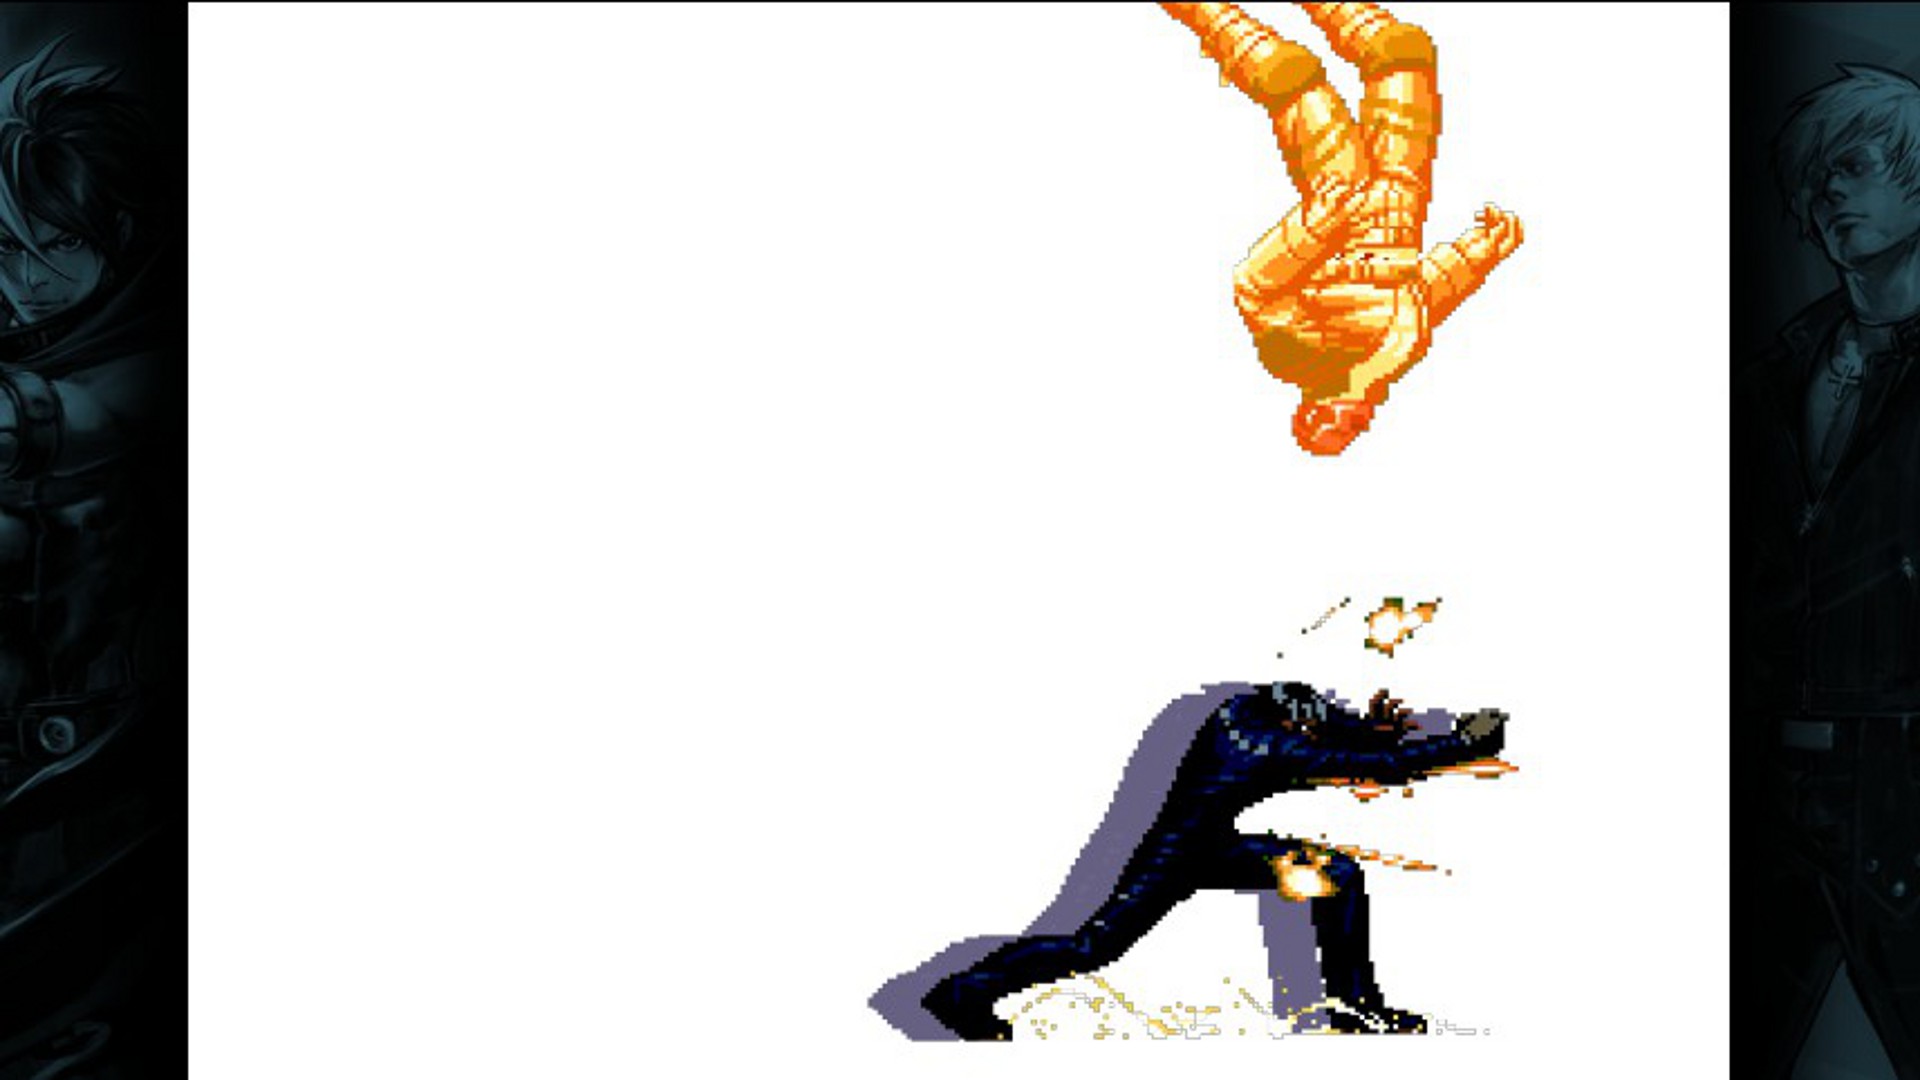 THE KING OF FIGHTERS 2002 UNLIMITED MATCH screenshot